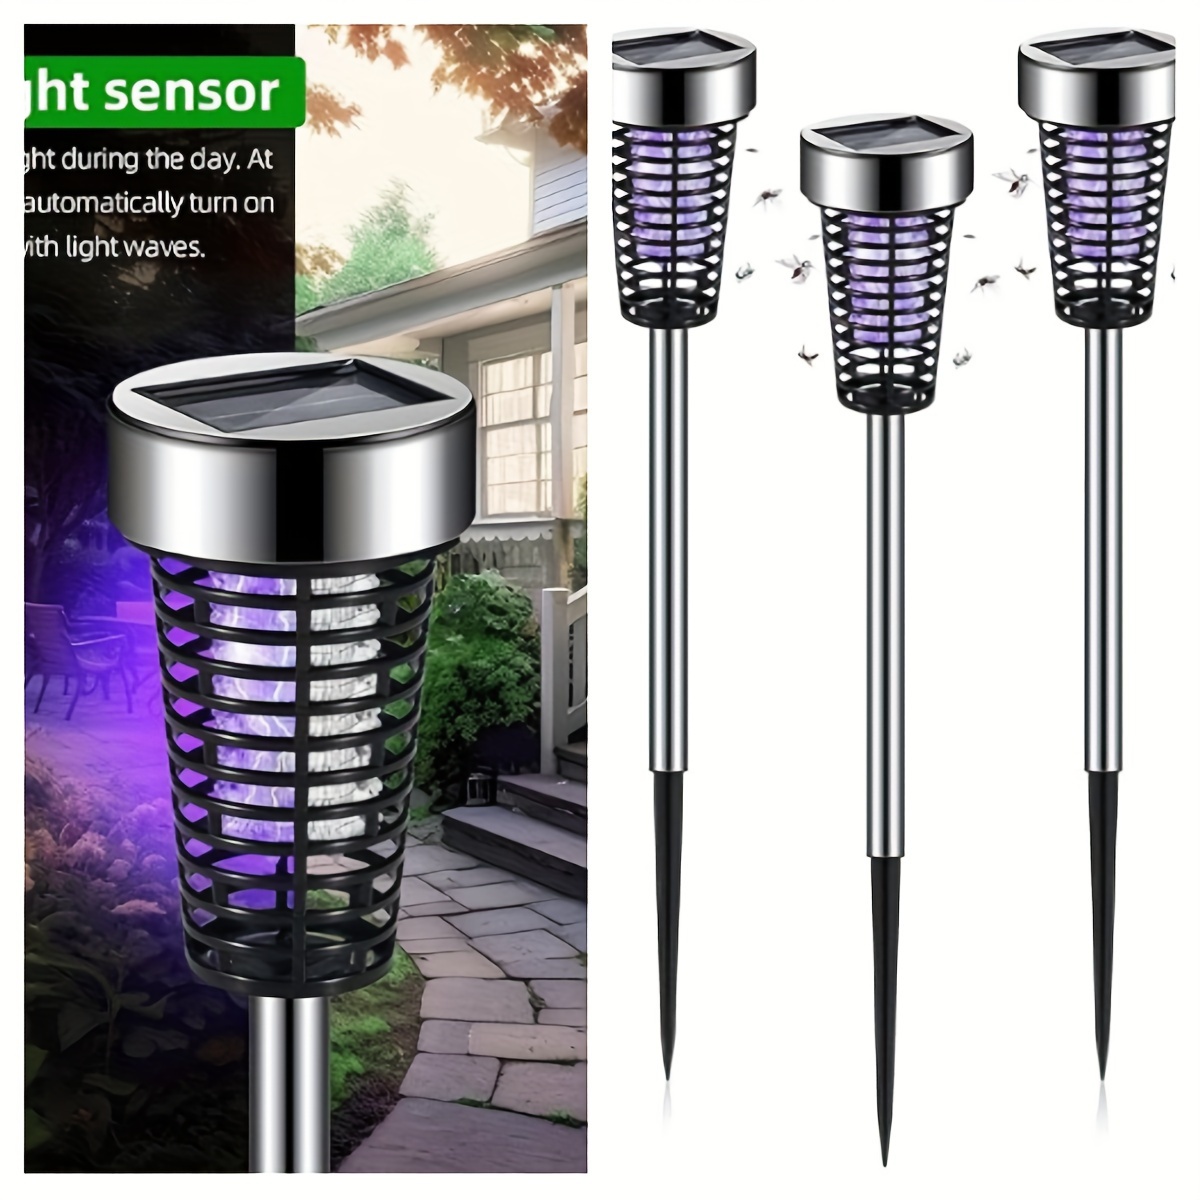 

Solar-powered Bug Zapper Lights, Outdoor Mosquito Killer Lighting With Uv Light And Landscape Led Lamp 2 In 1 For Garden Patio Backyard Camping